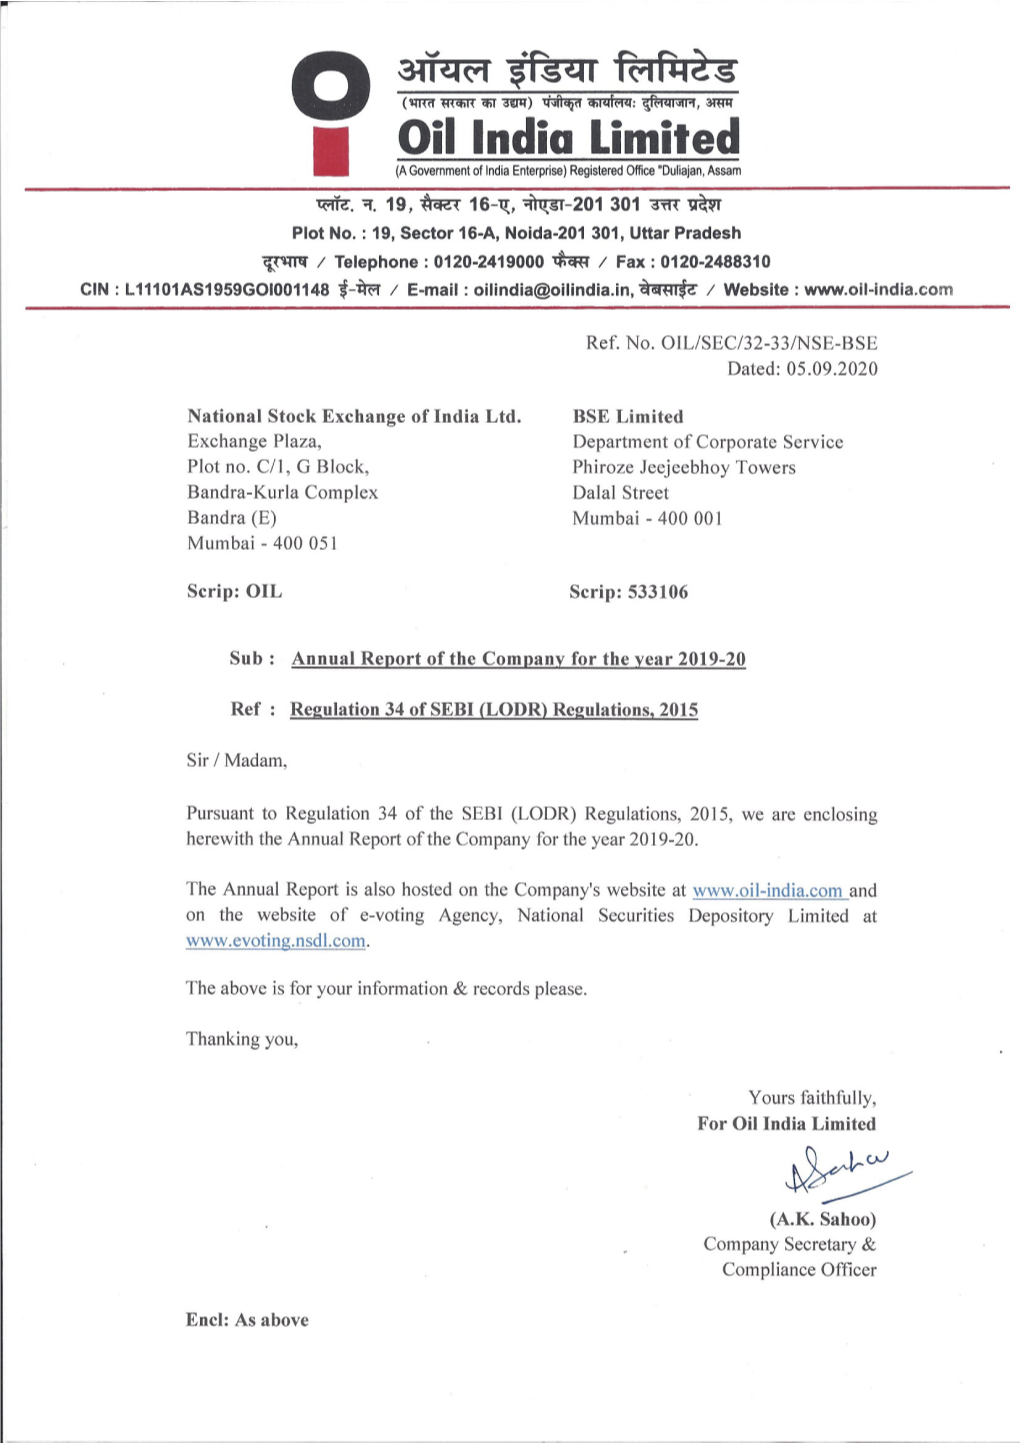 Oil India Limited (A Government of India Enterprise) Registered Office "Duliajan, Assam